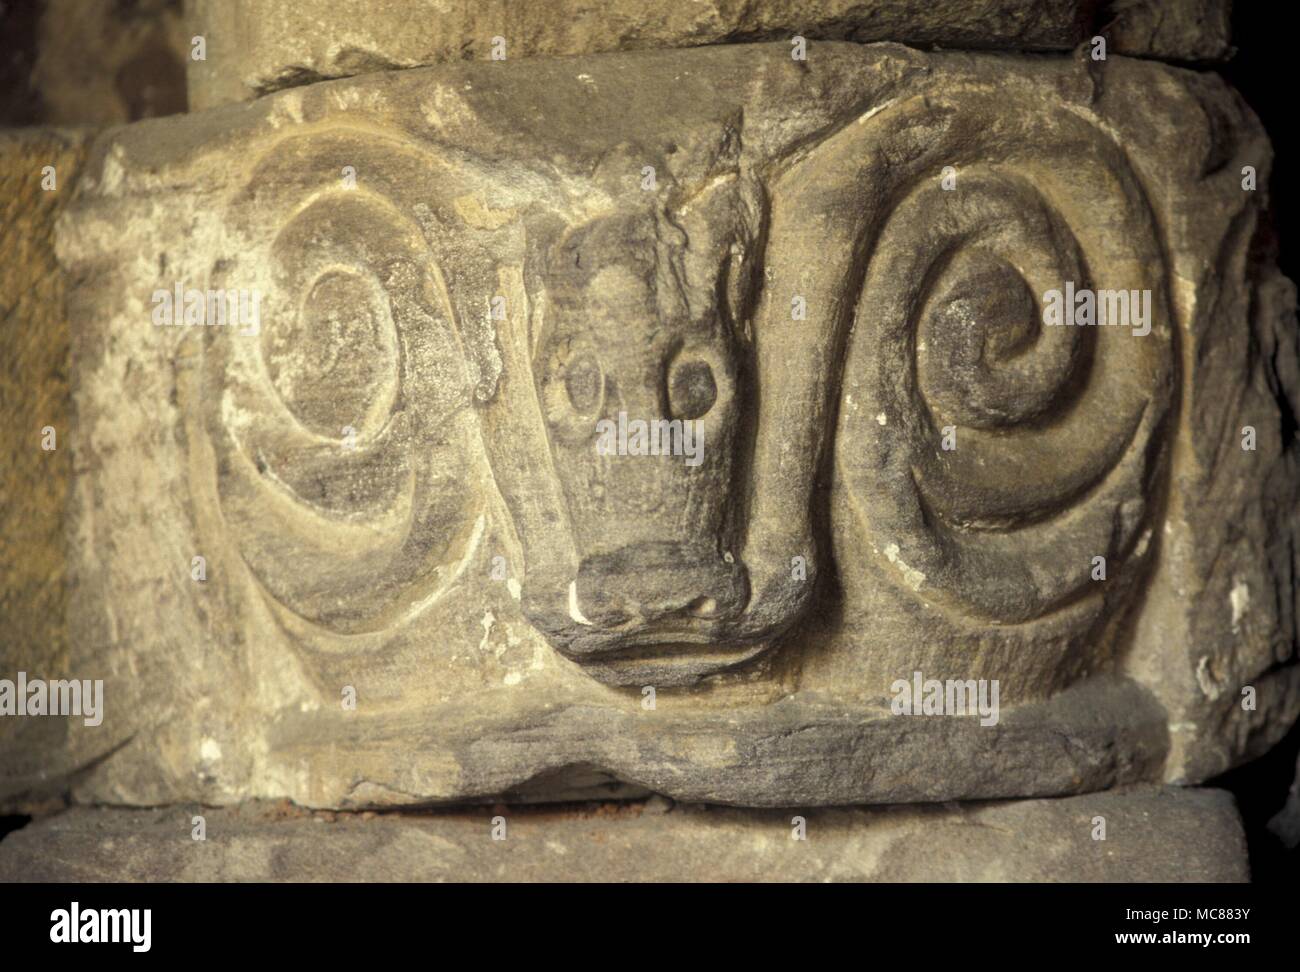 Spirals - Hereford. Spirals formed by the horns of the ram's head. Detached capital in Hereford cathedral - formerly part of the actual fabric of the cathedral. Stock Photo